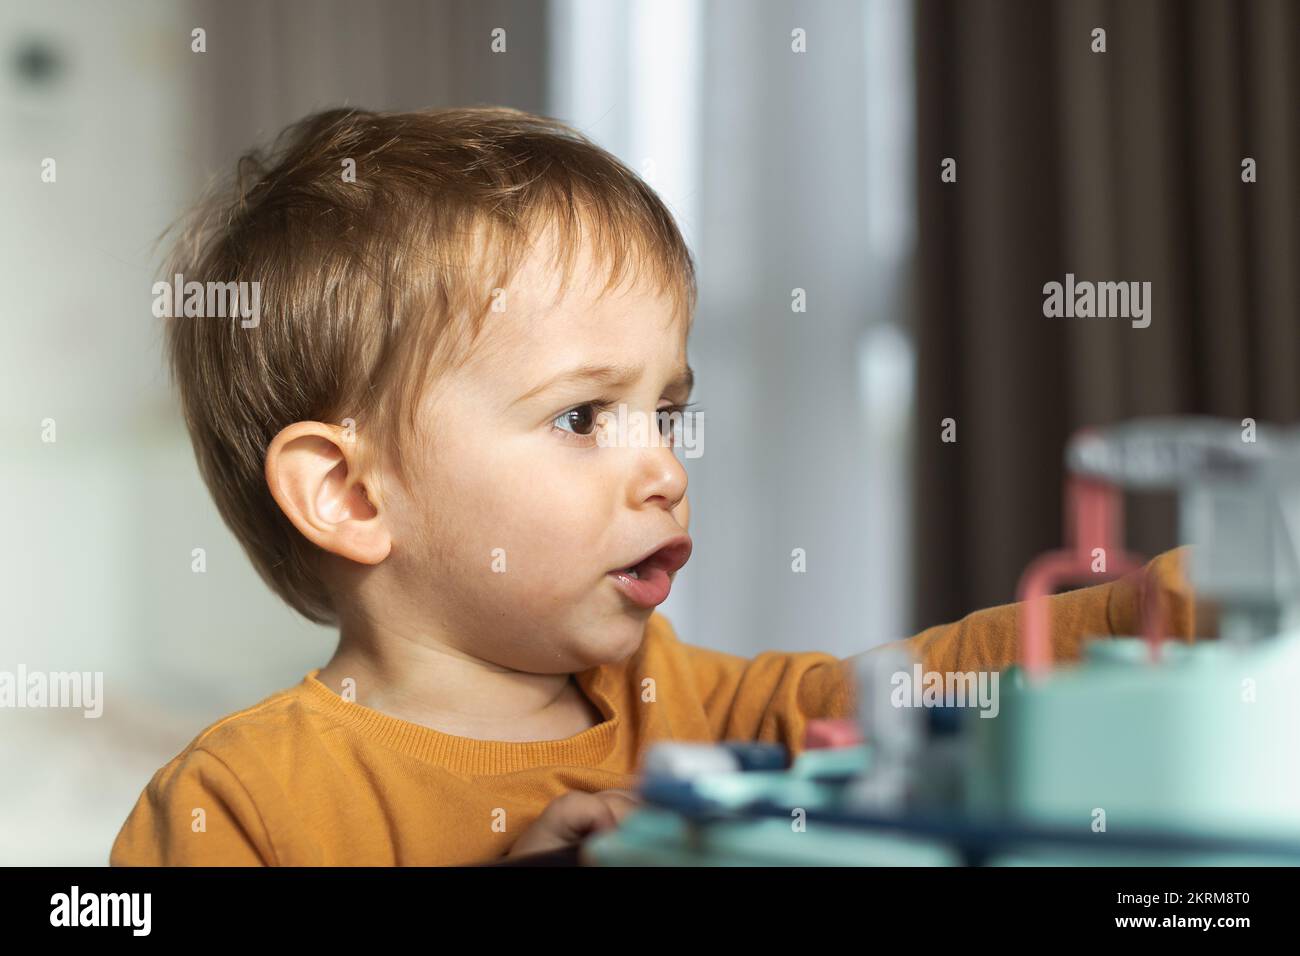 Adorable little blond haired boy in orange sweater sitting at table and playing with toy while spending time at home Stock Photo